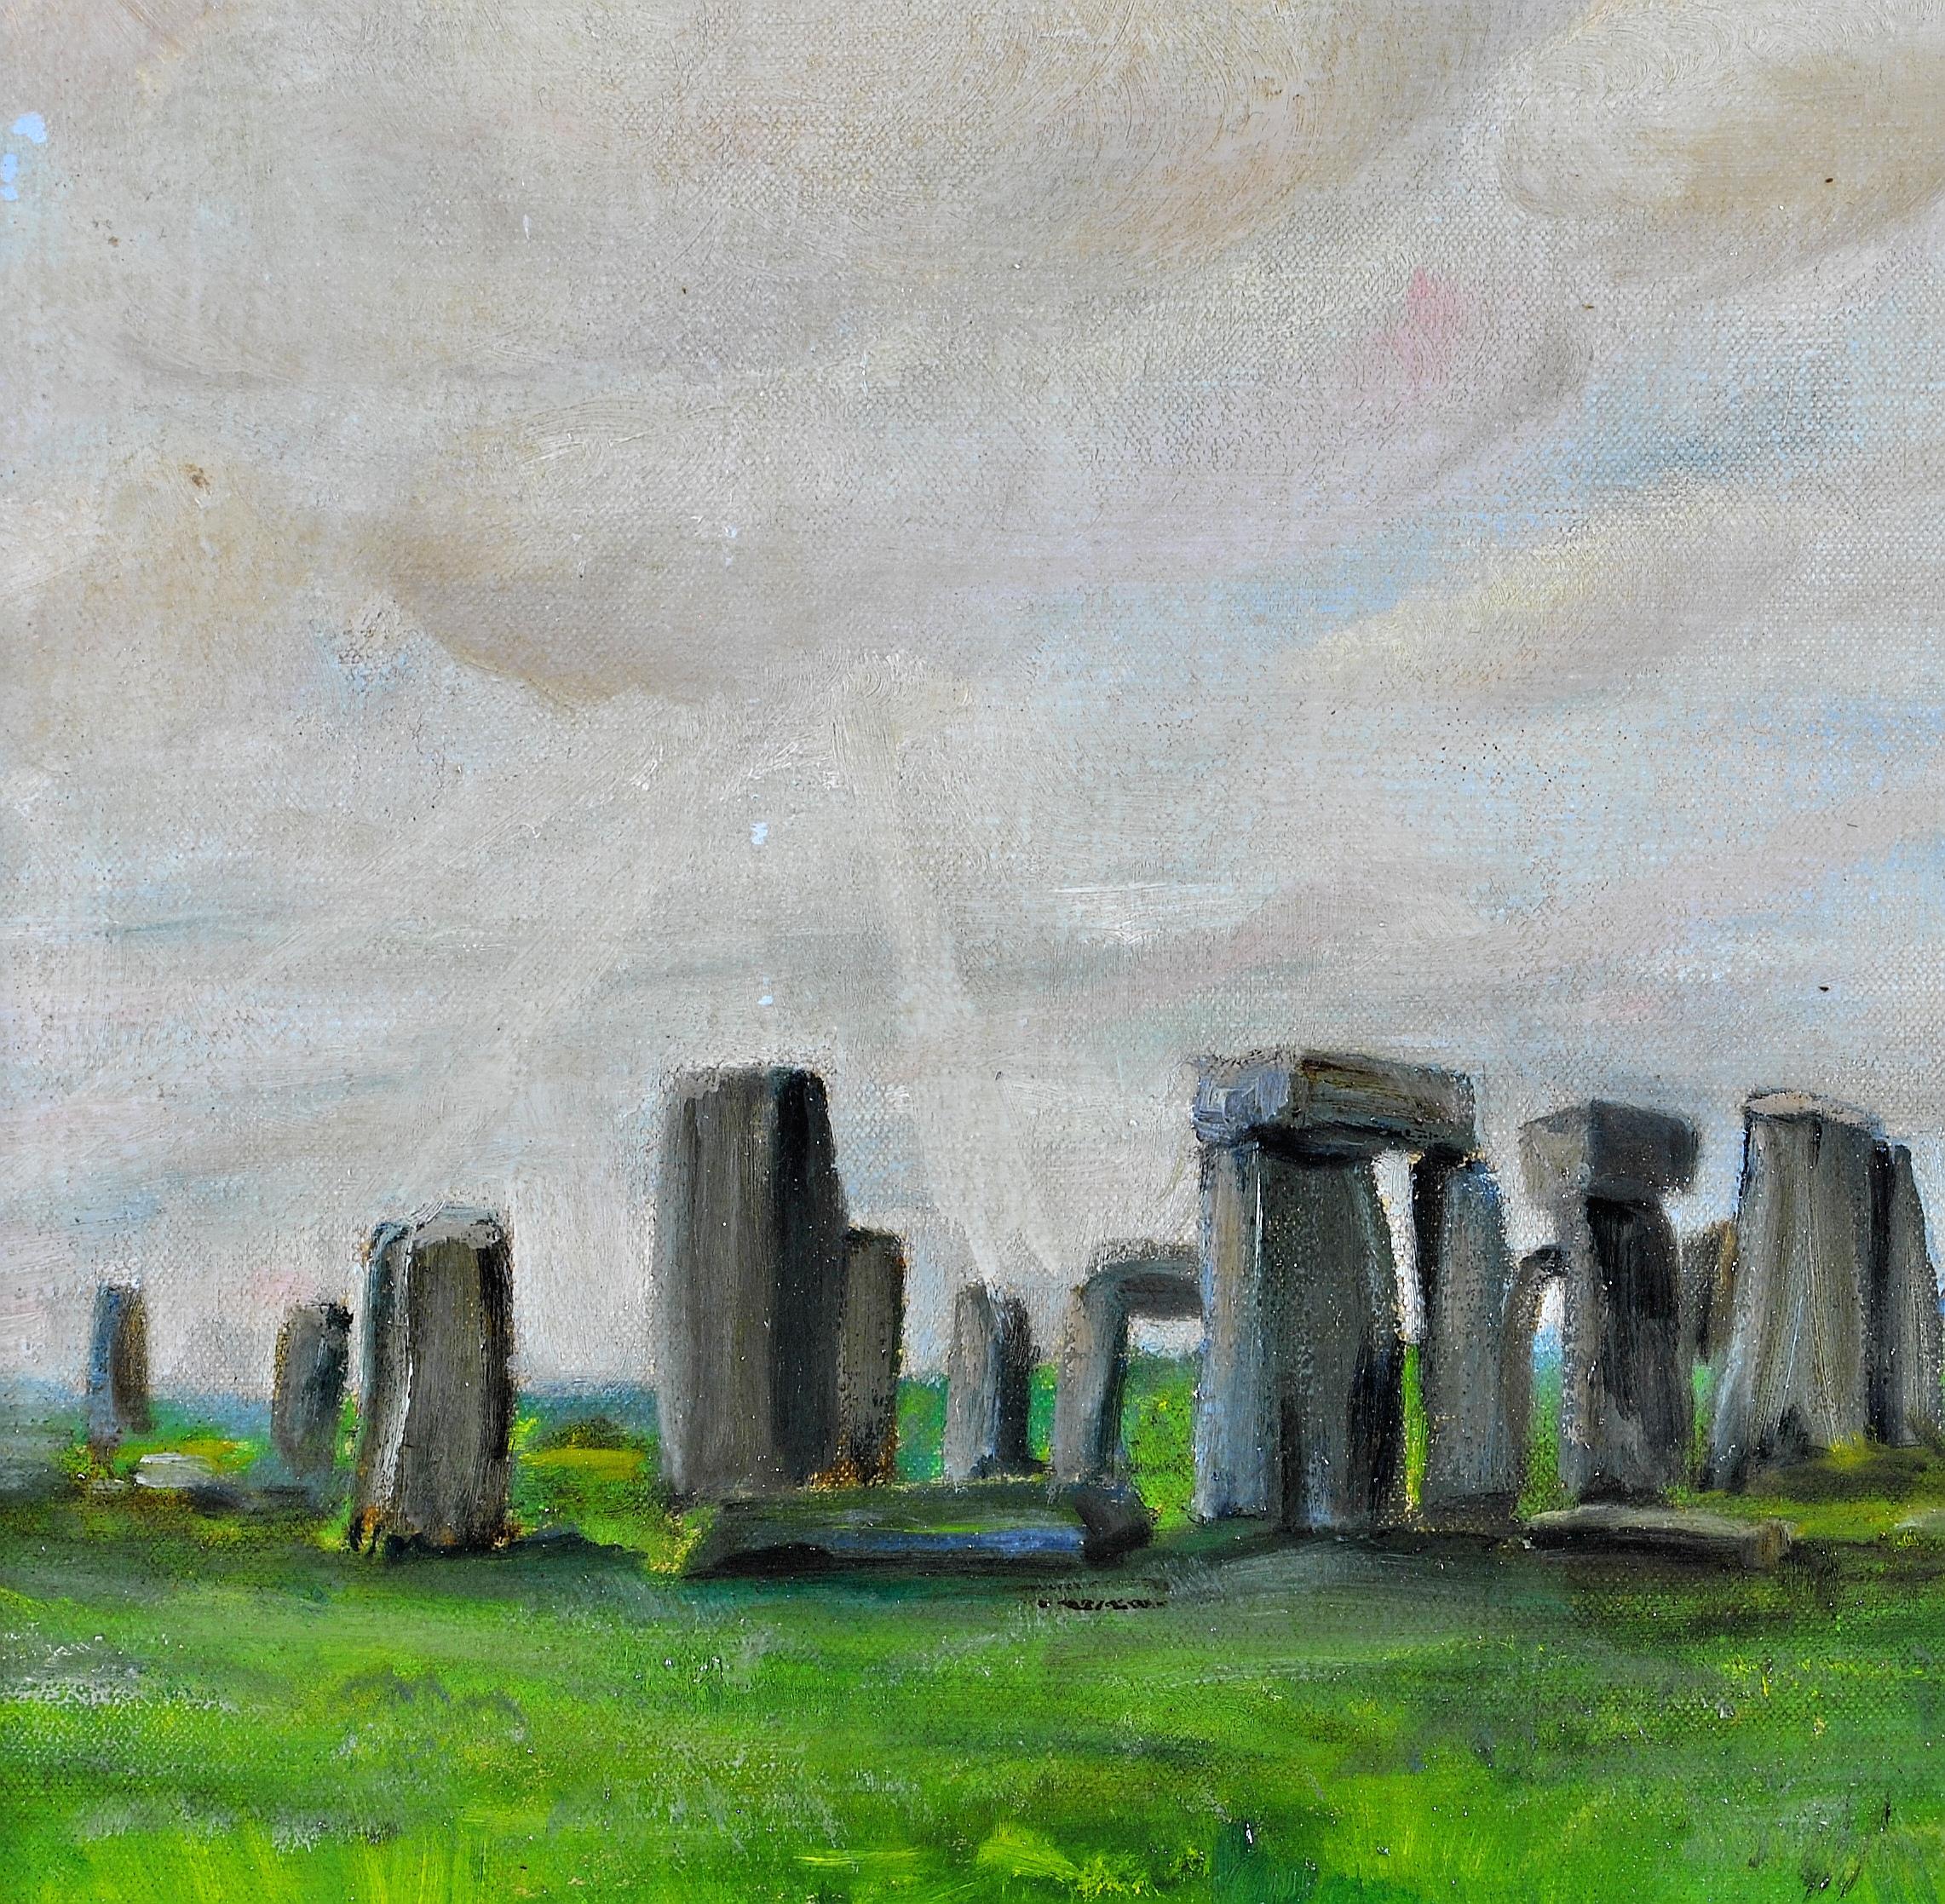 A beautiful c.1920 oil on canvas depicting the famous prehistoric rock formation of Stonehenge under an atmospheric cloudy sky, by Charles Henry Harrison Burleigh. Excellent quality and very early painting of Stonehenge. Signed lower left and